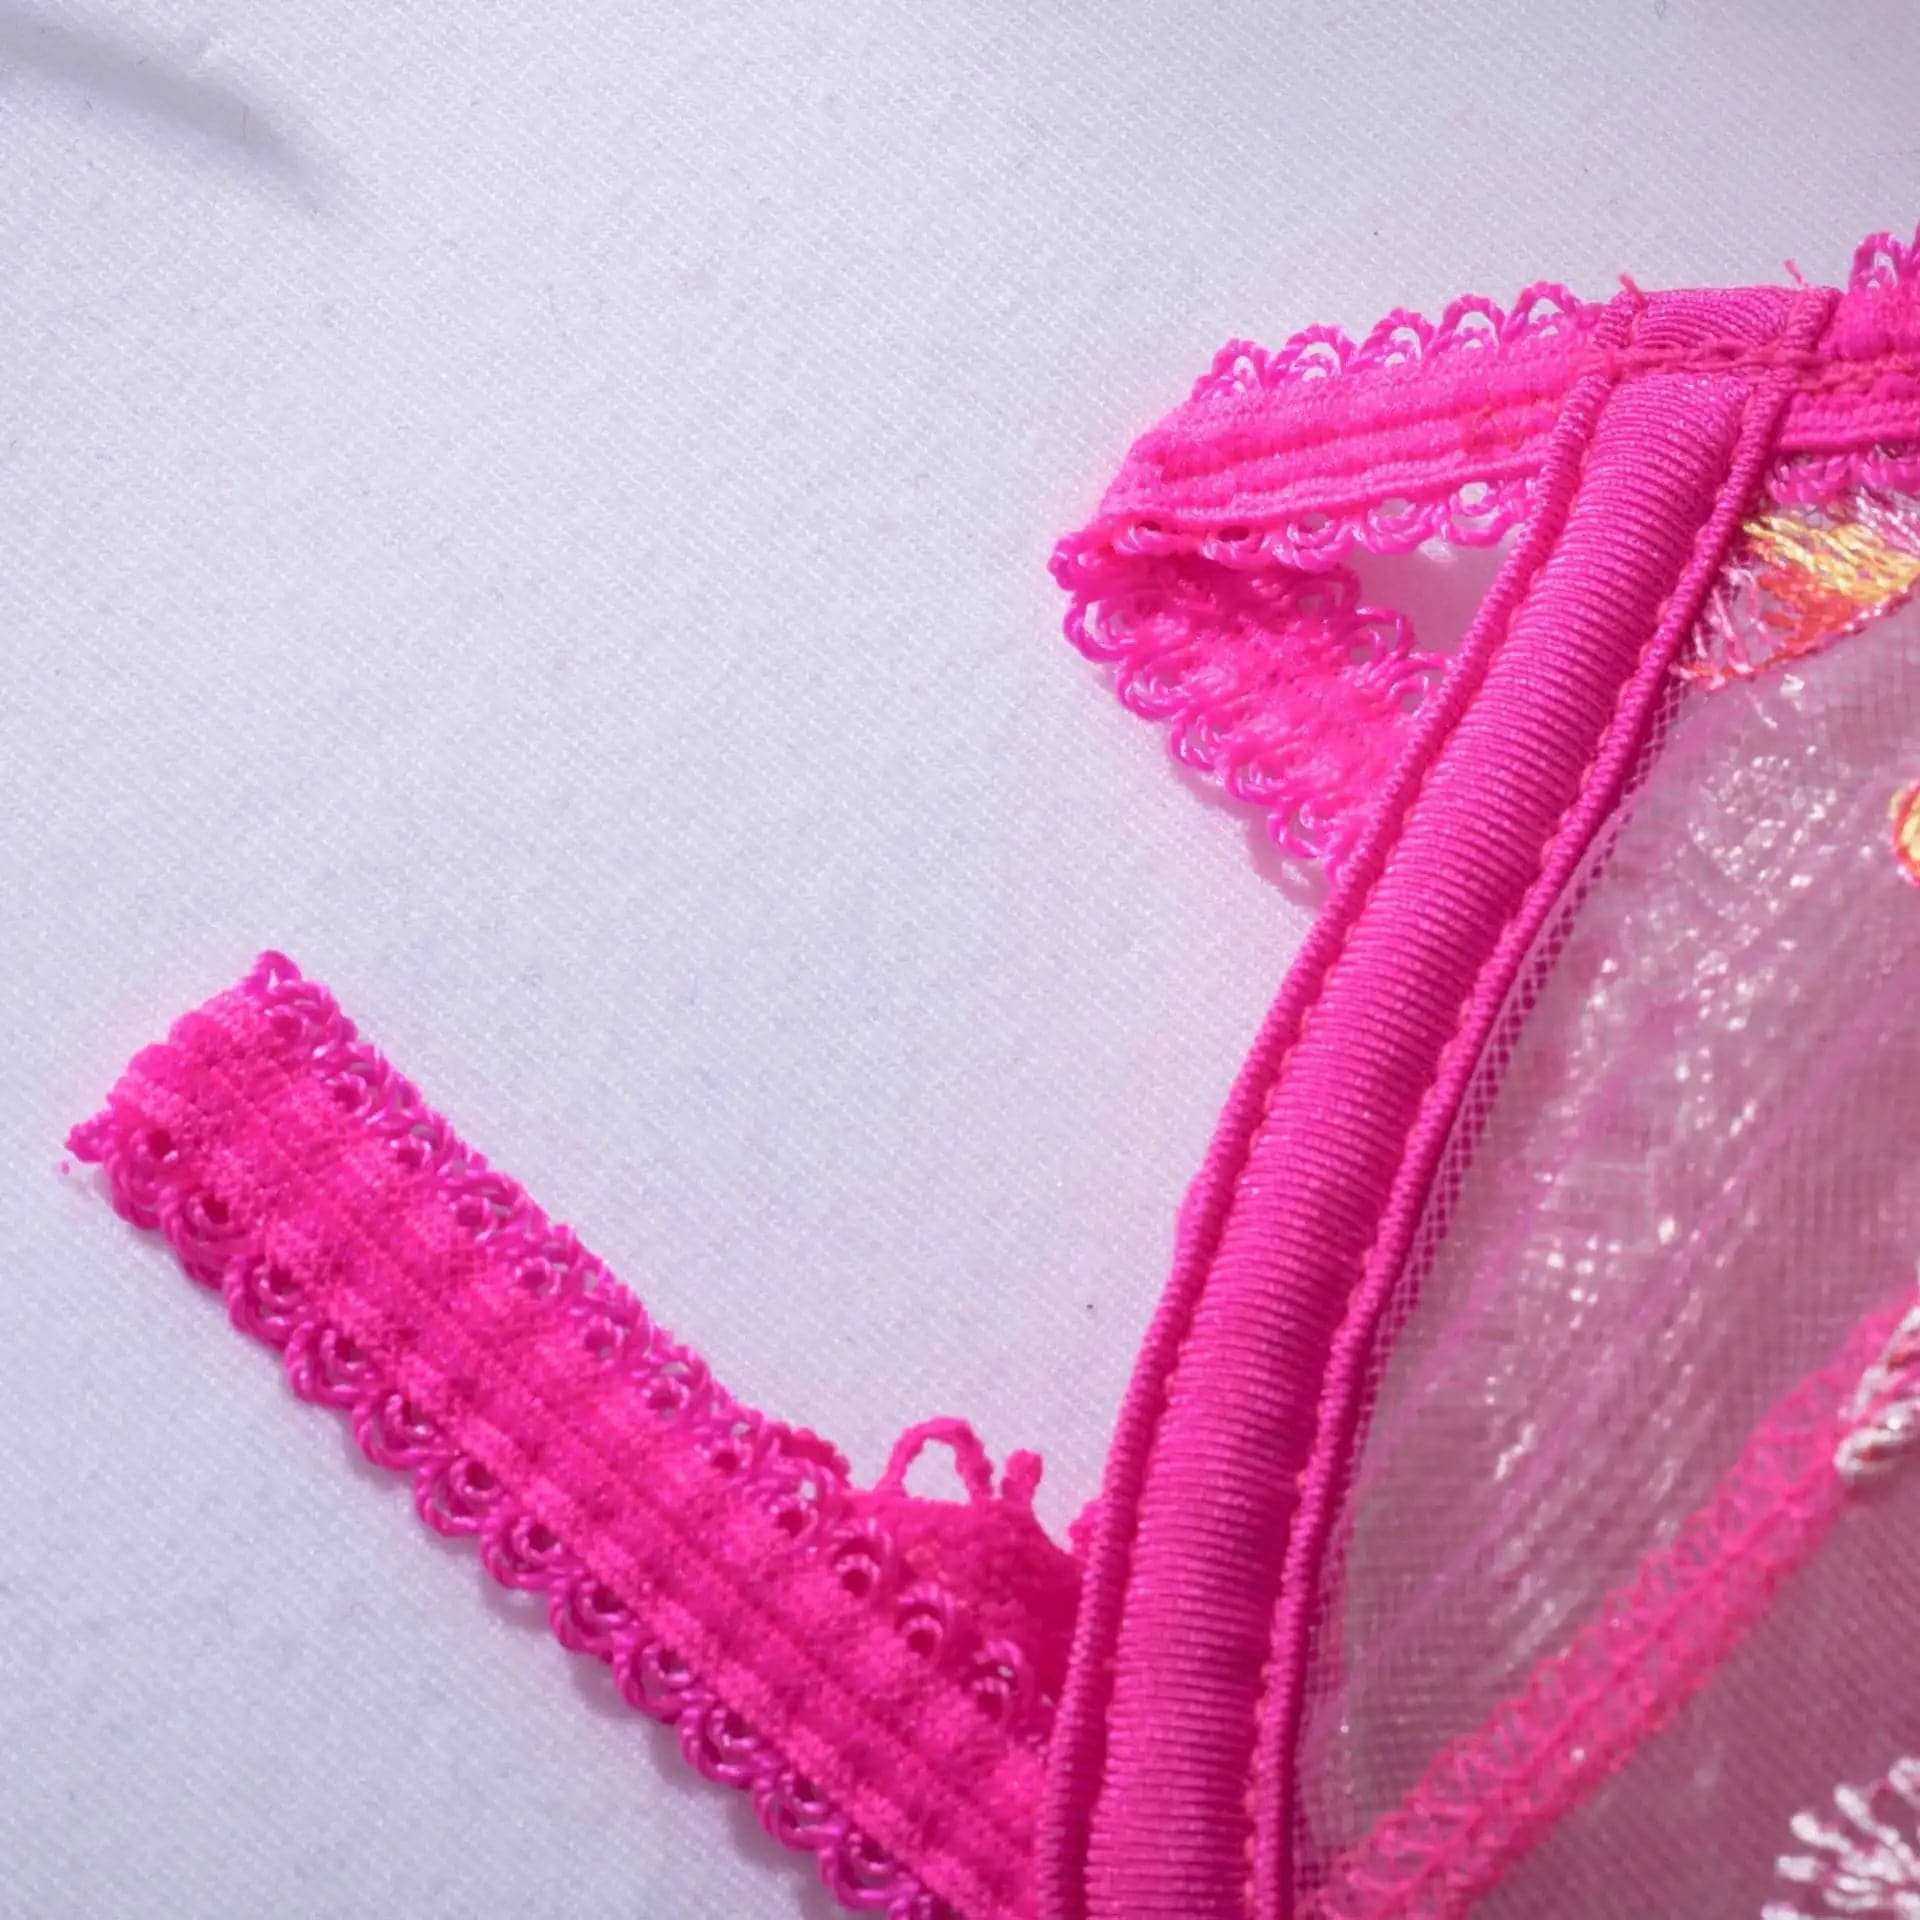 Pink Floral Embroidery Thongs Garter Bra Set - Sexy Women's Underwire Lingerie - Wandering Woman